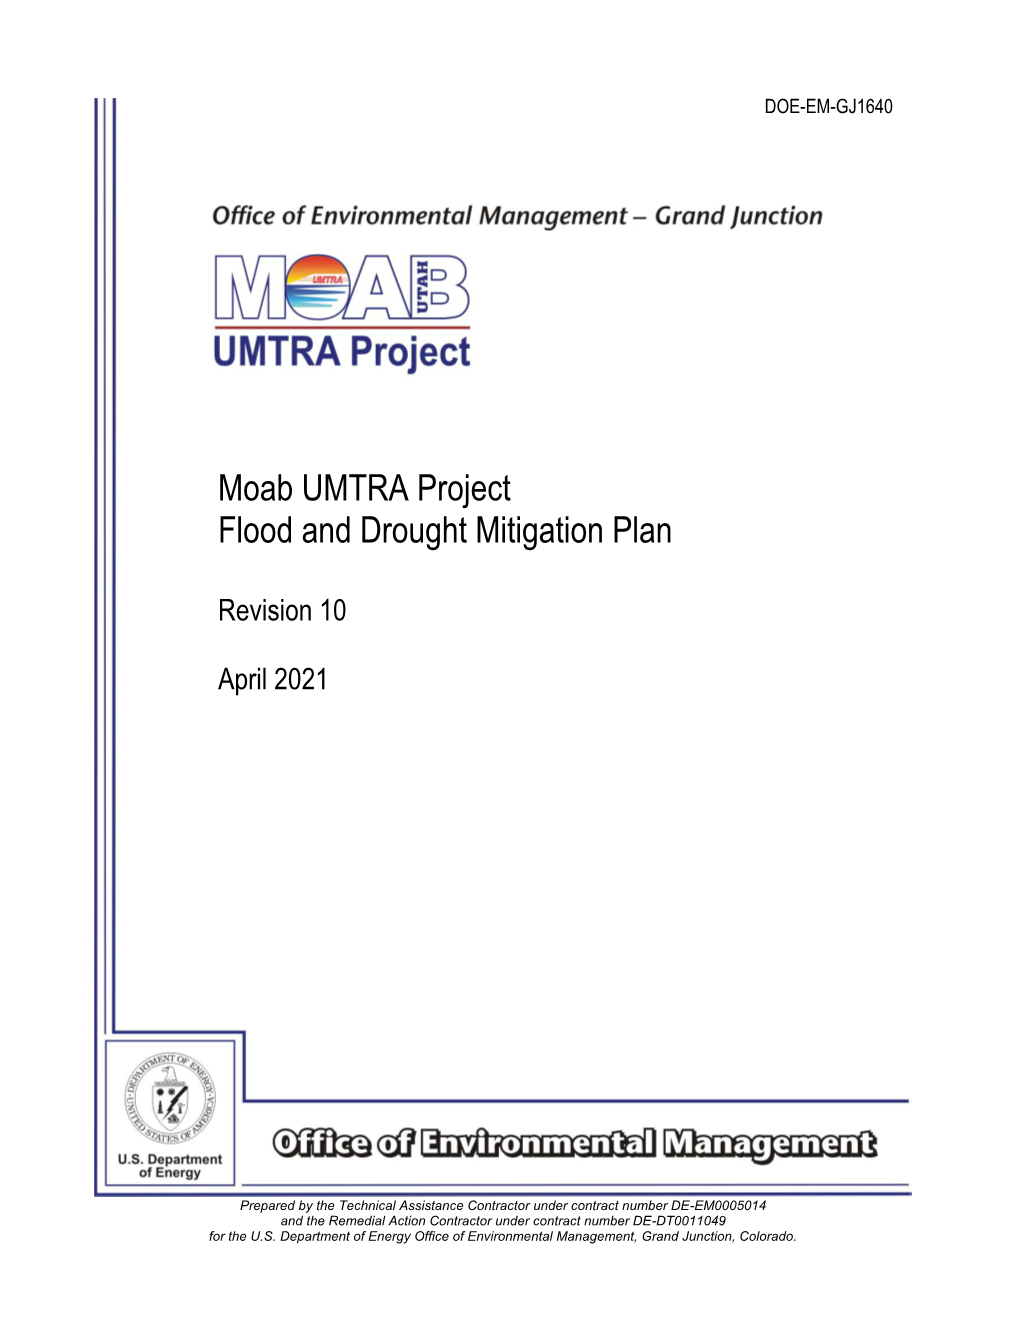 Flood and Drought Mitigation Plan